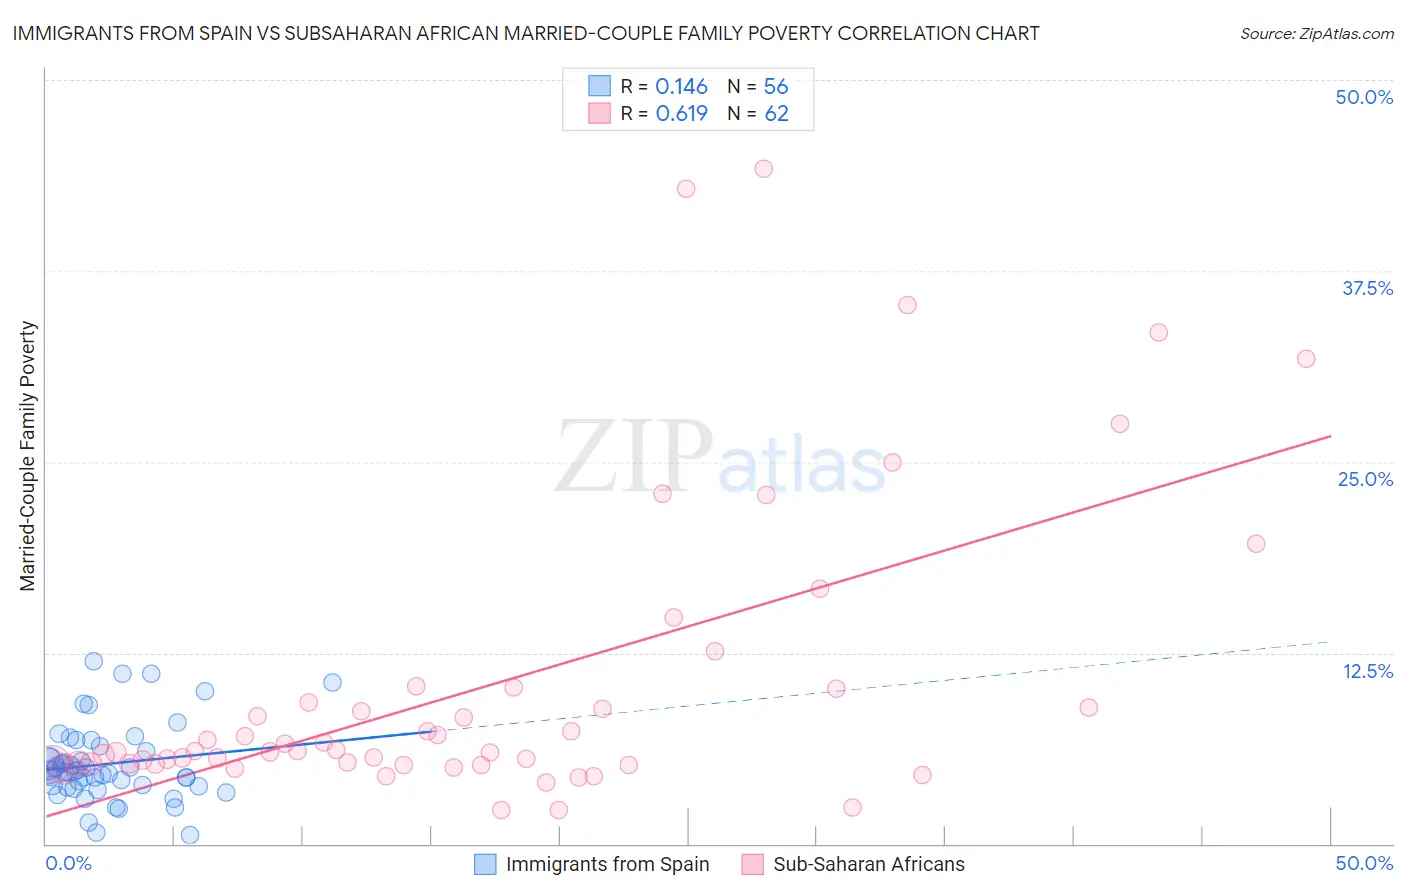 Immigrants from Spain vs Subsaharan African Married-Couple Family Poverty